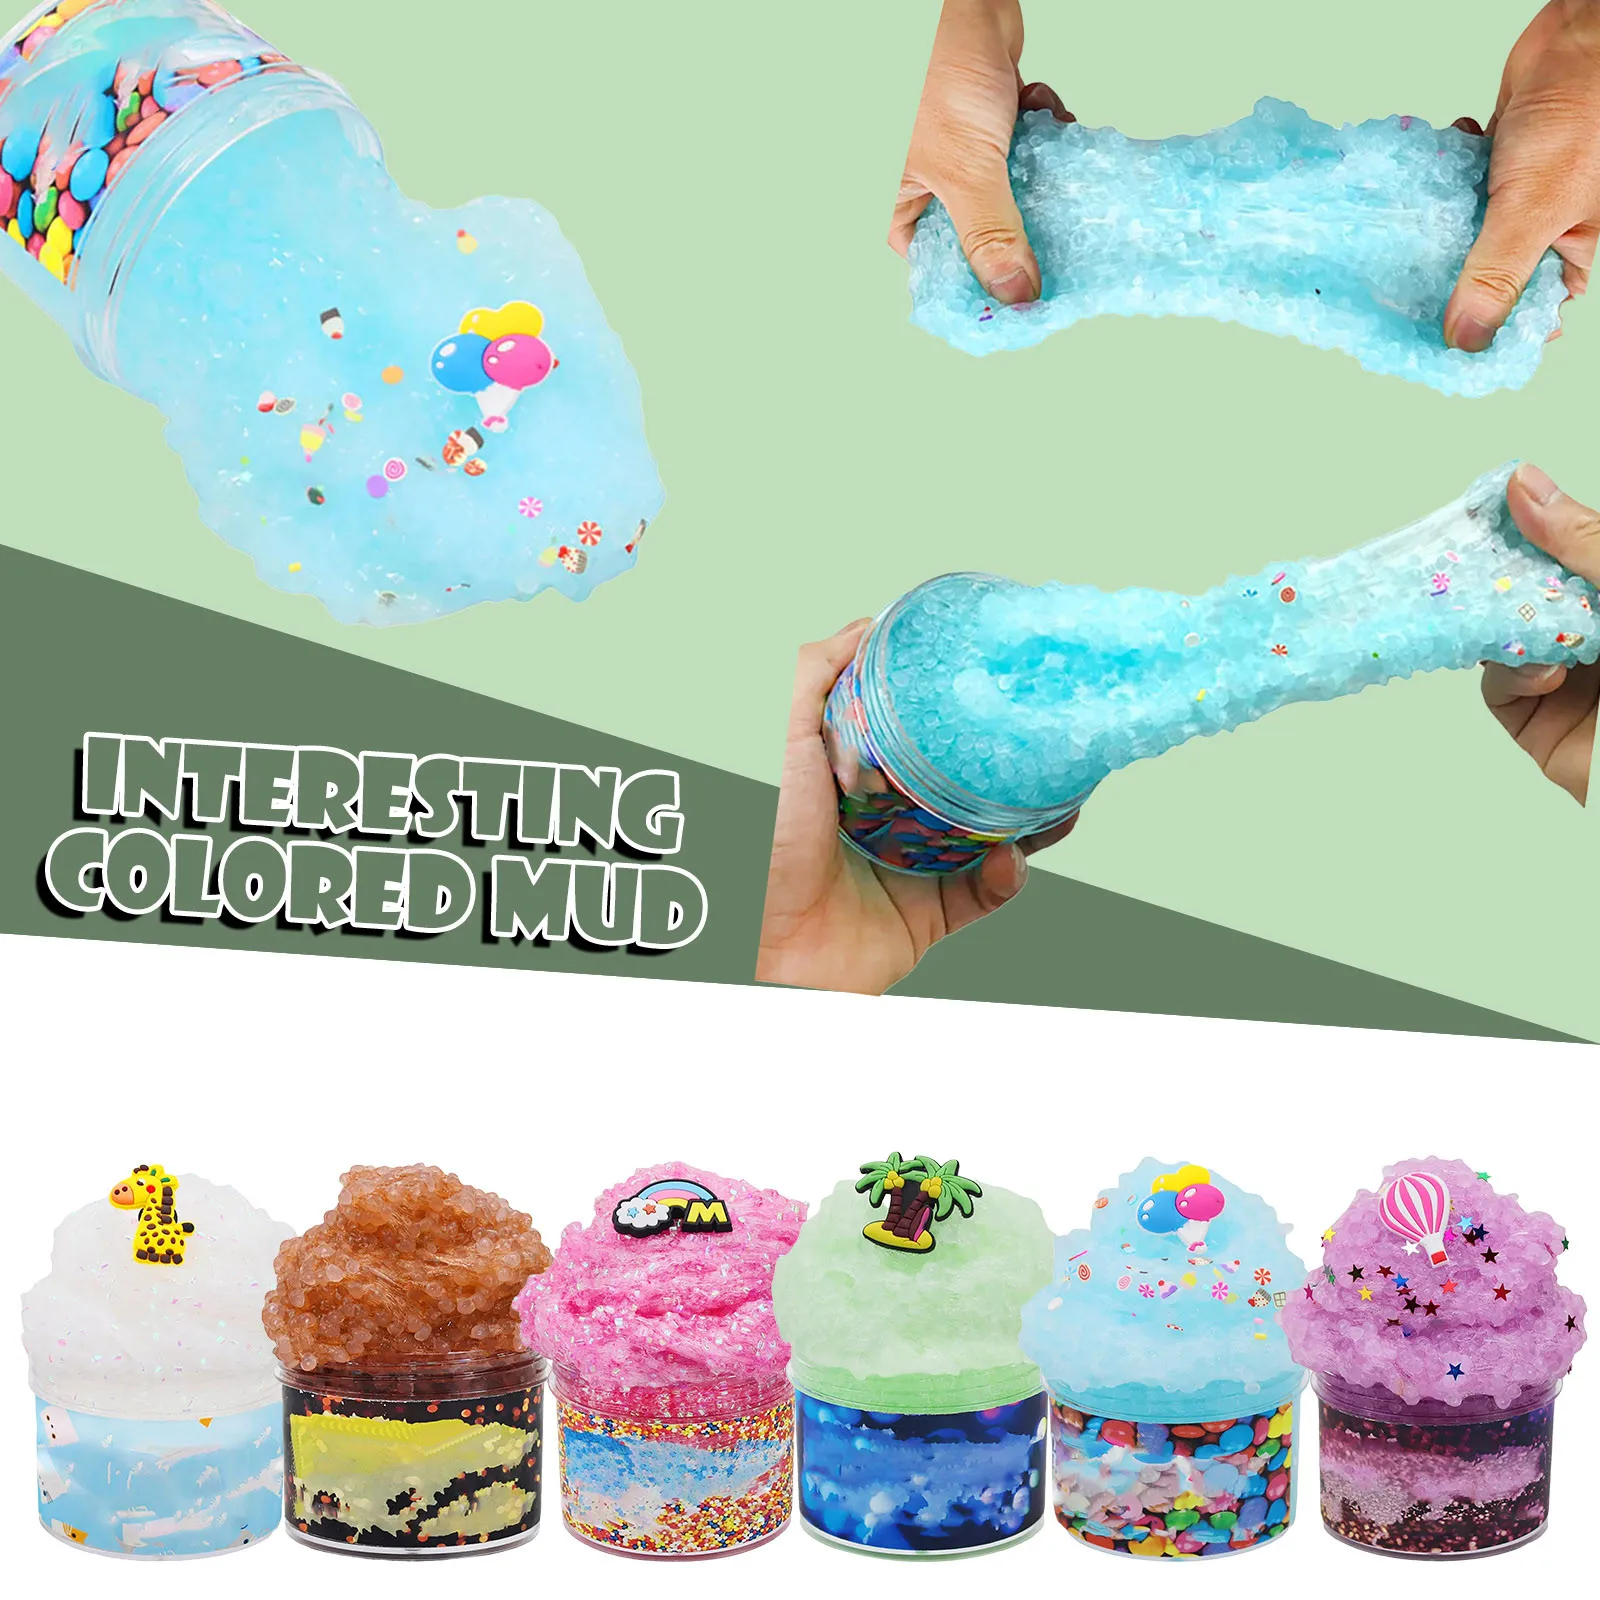 pea popper fidget Slime Kits Fluffy Butter Slime fruit Slime Super Soft Stretchy and Non Sticky DIY Sludge Toy Party Favors for Kids dumplings stress ball